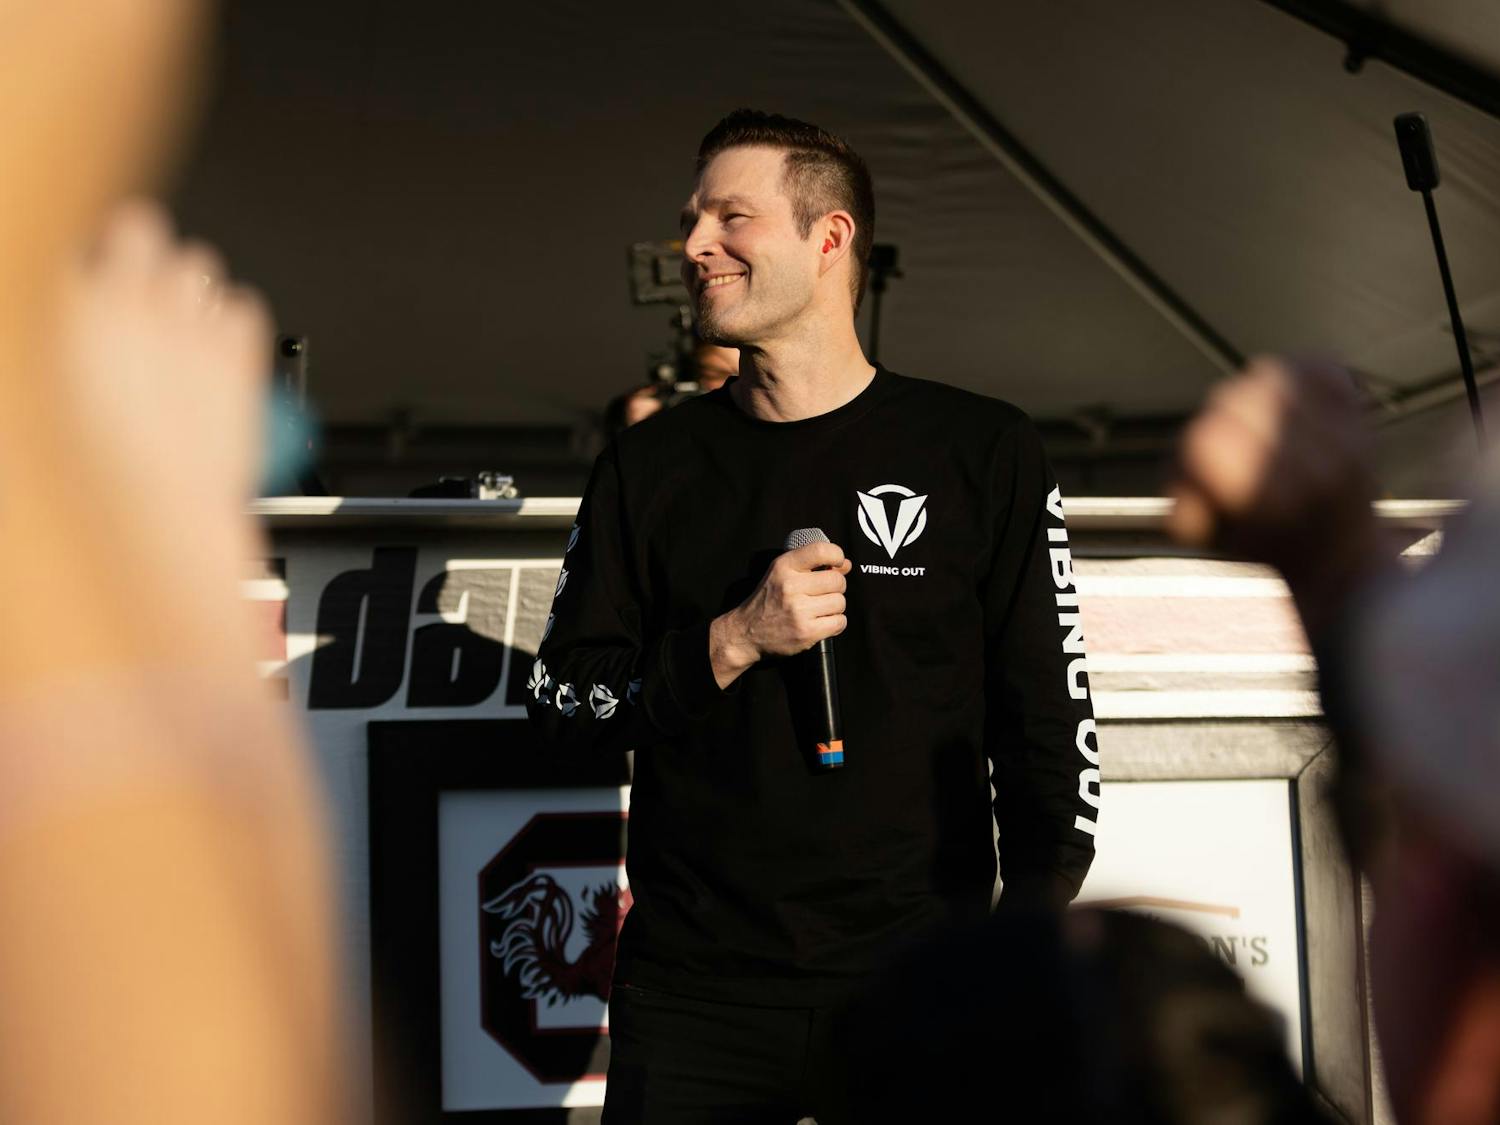 Darude smiles at the crowd during his concert at Gamecock Park prior to South Carolina's game against Kentucky. South Carolina first played Darude's song "Sandstorm" during a game against Ole Miss in 2009.&nbsp;